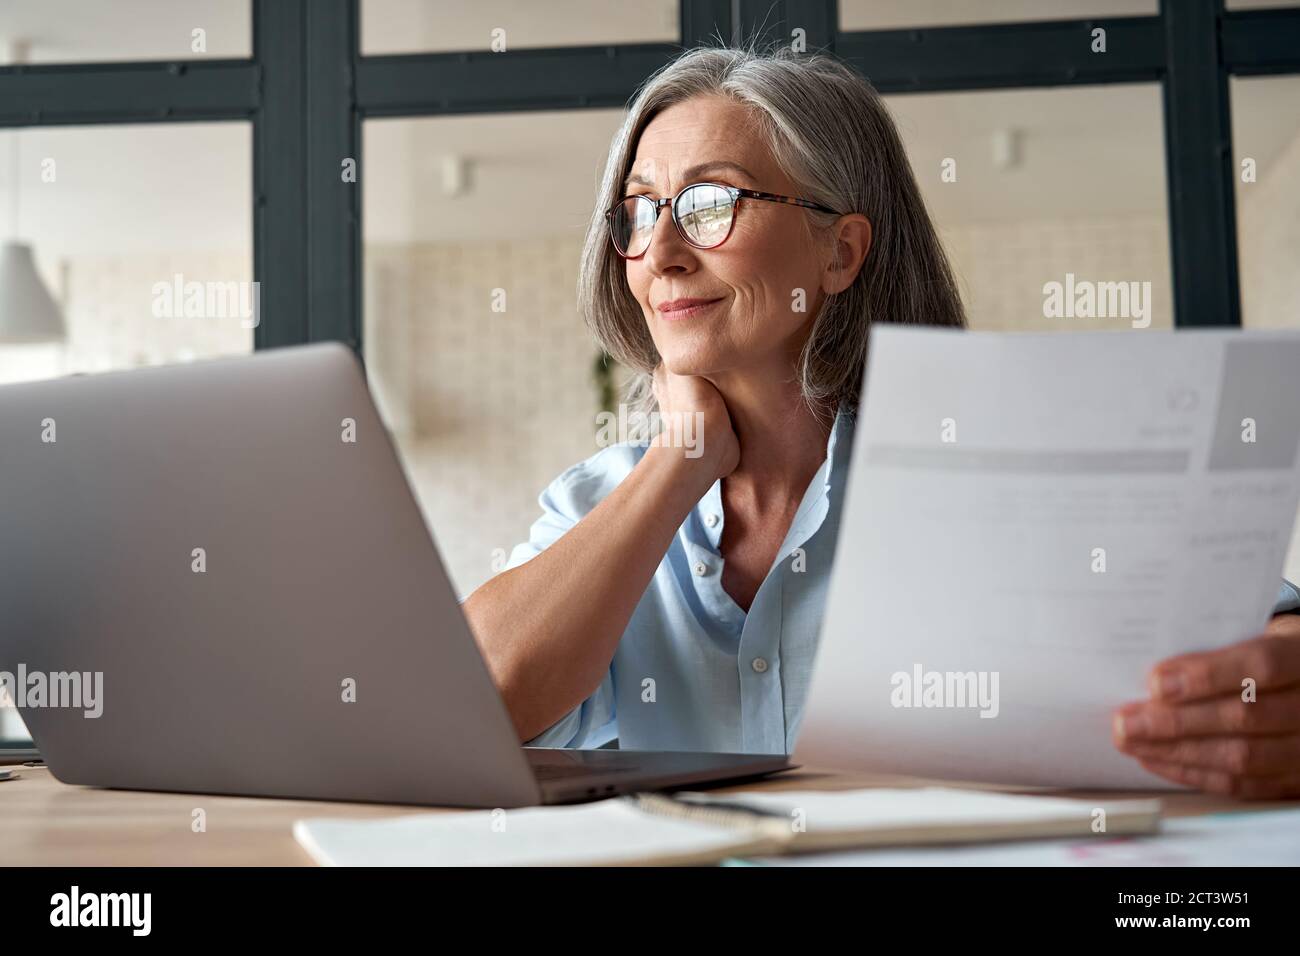 Smiling mature middle aged business woman holding cv searching job online. Stock Photo